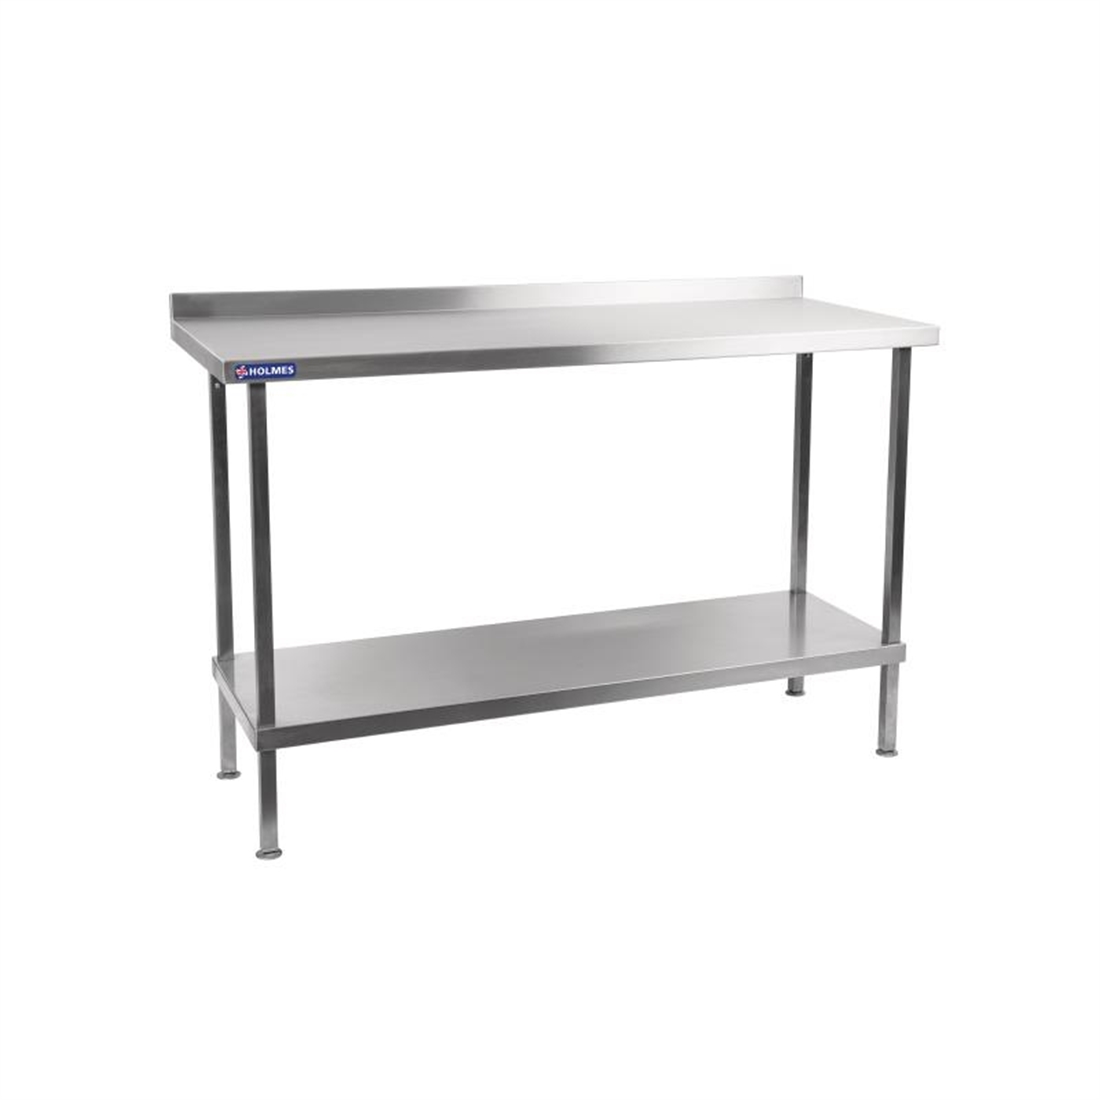 Holmes Self Assembly Stainless Steel Wall Table 900mm